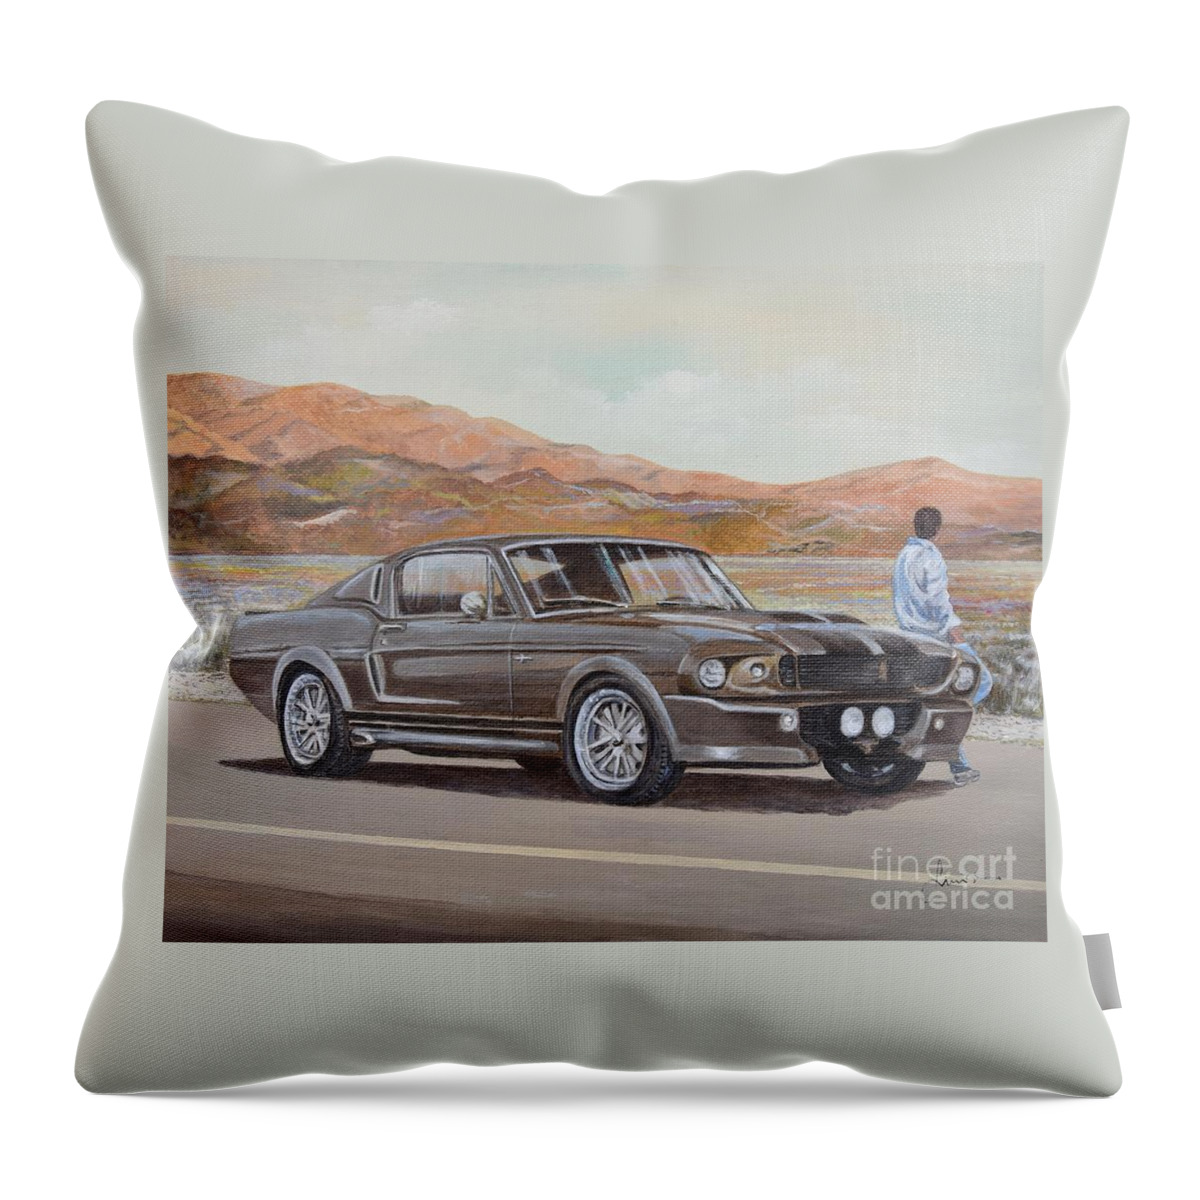 1967 Ford Mustang Fastback Throw Pillow featuring the painting 1967 Ford Mustang Fastback by Sinisa Saratlic